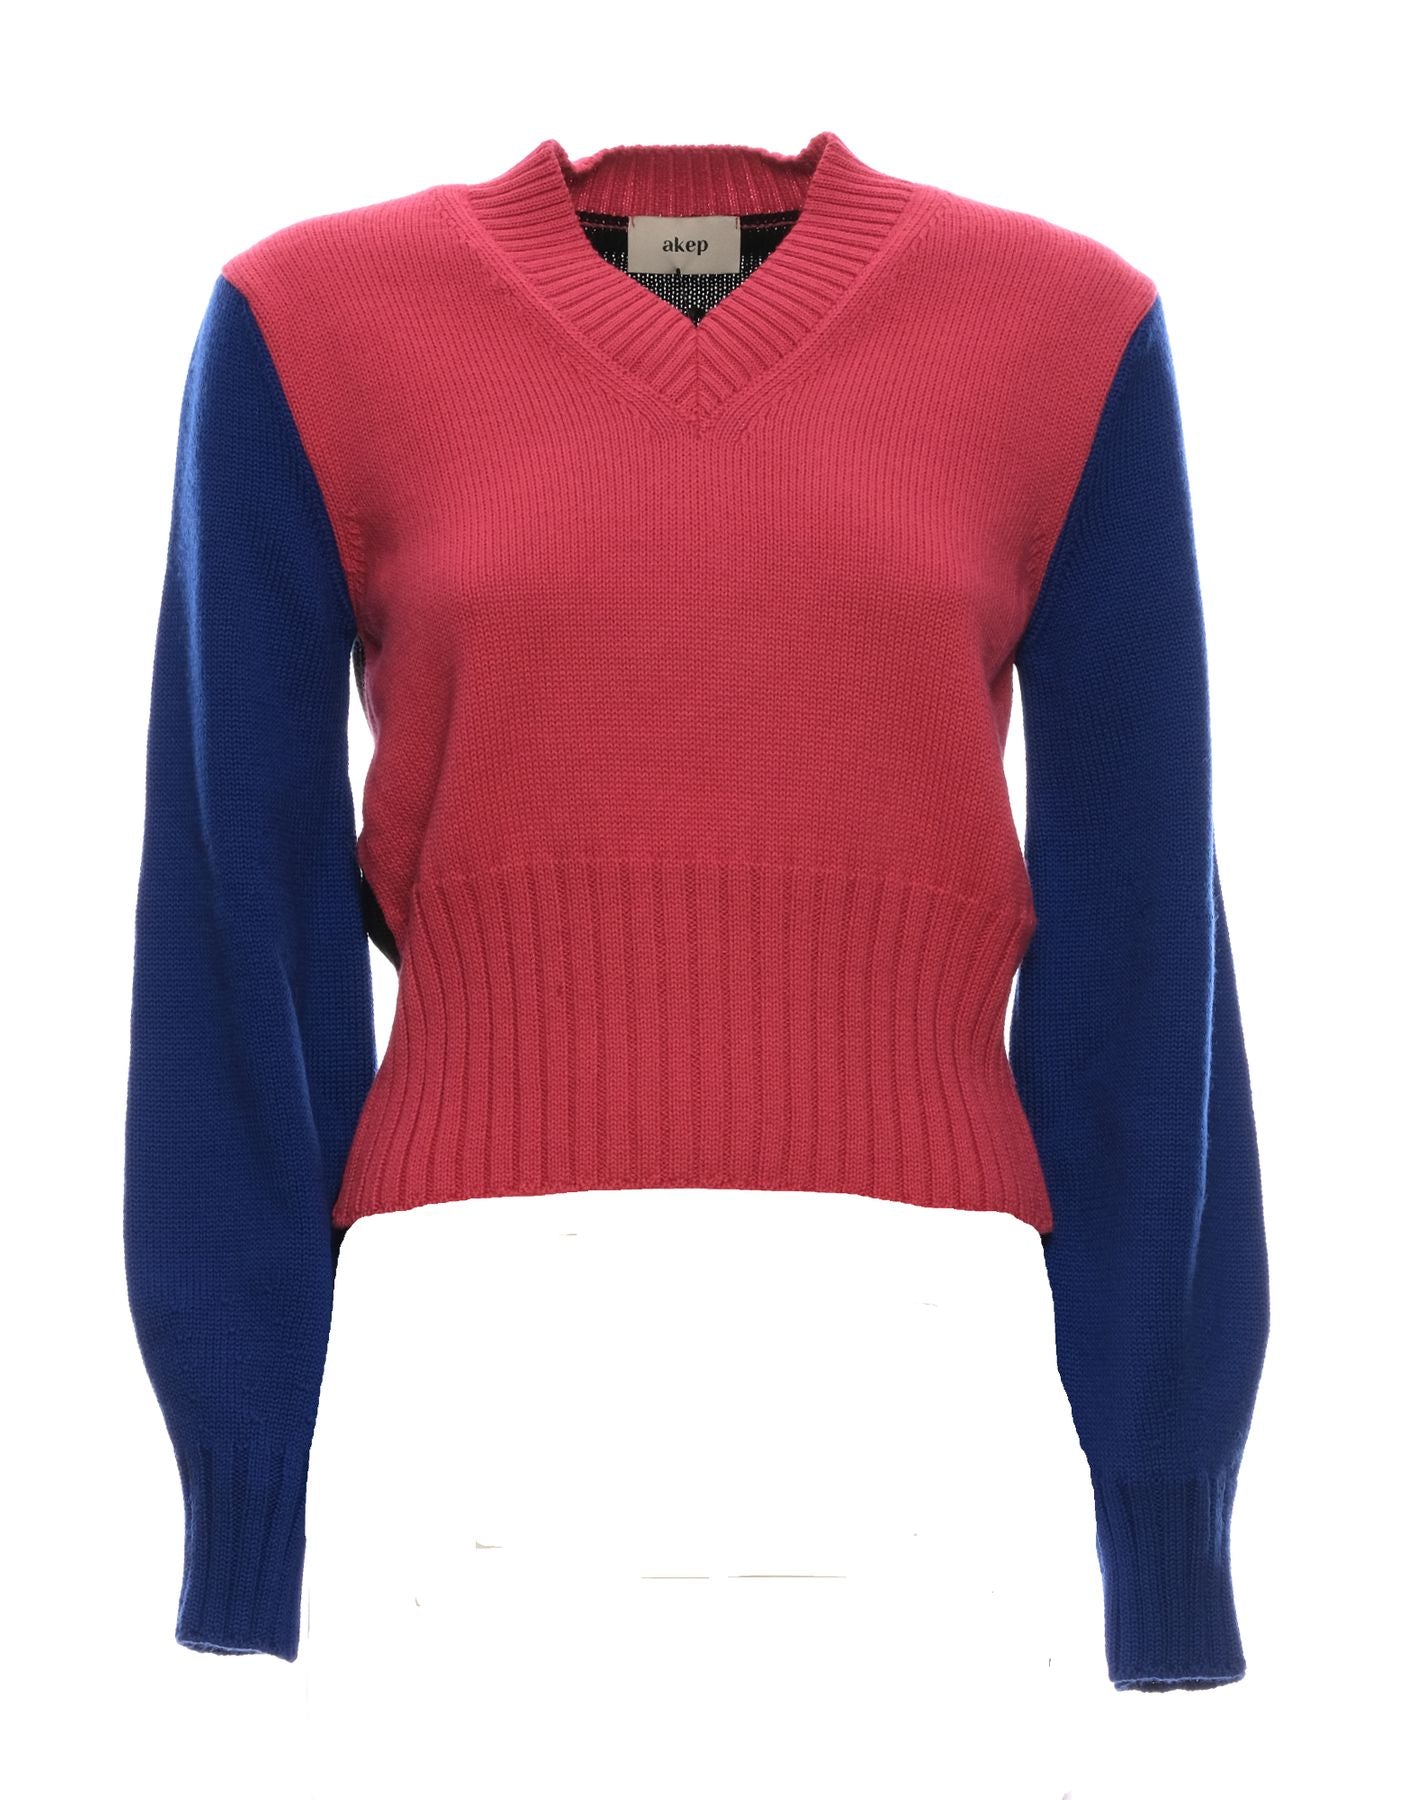 Sweater for woman AKEP K11039 VARIANTE 1